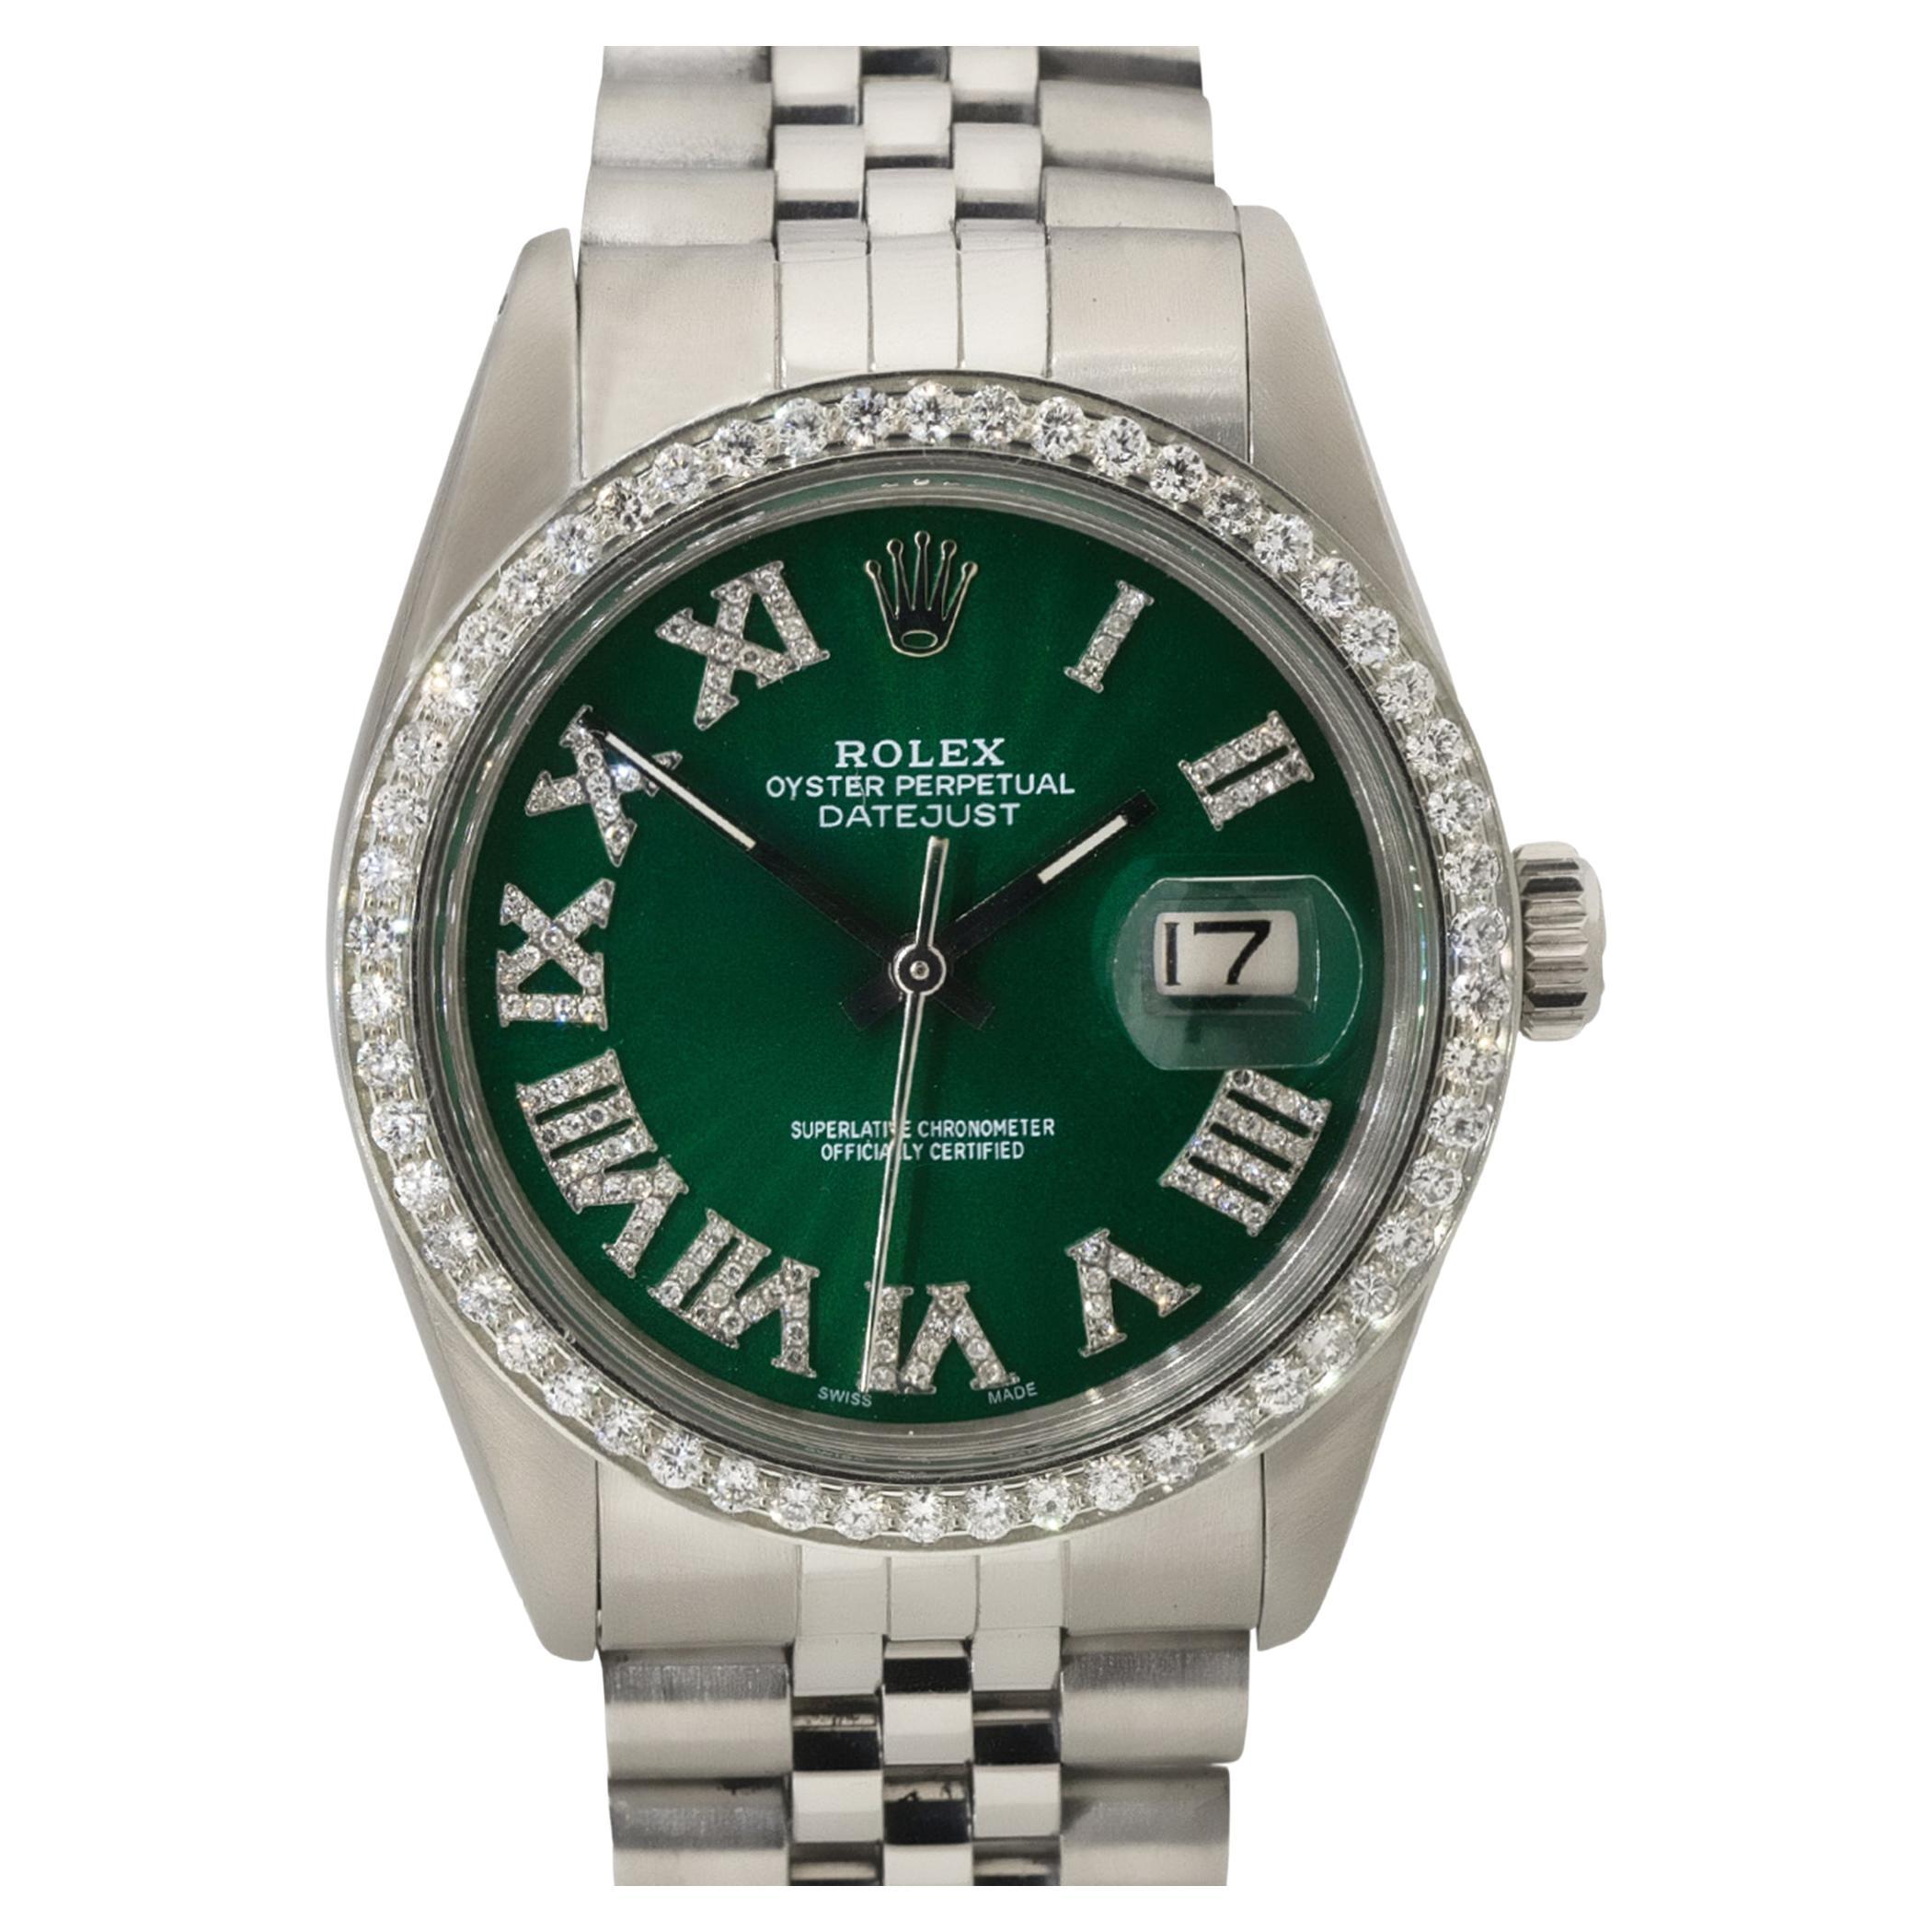 Why does Rolex use green?